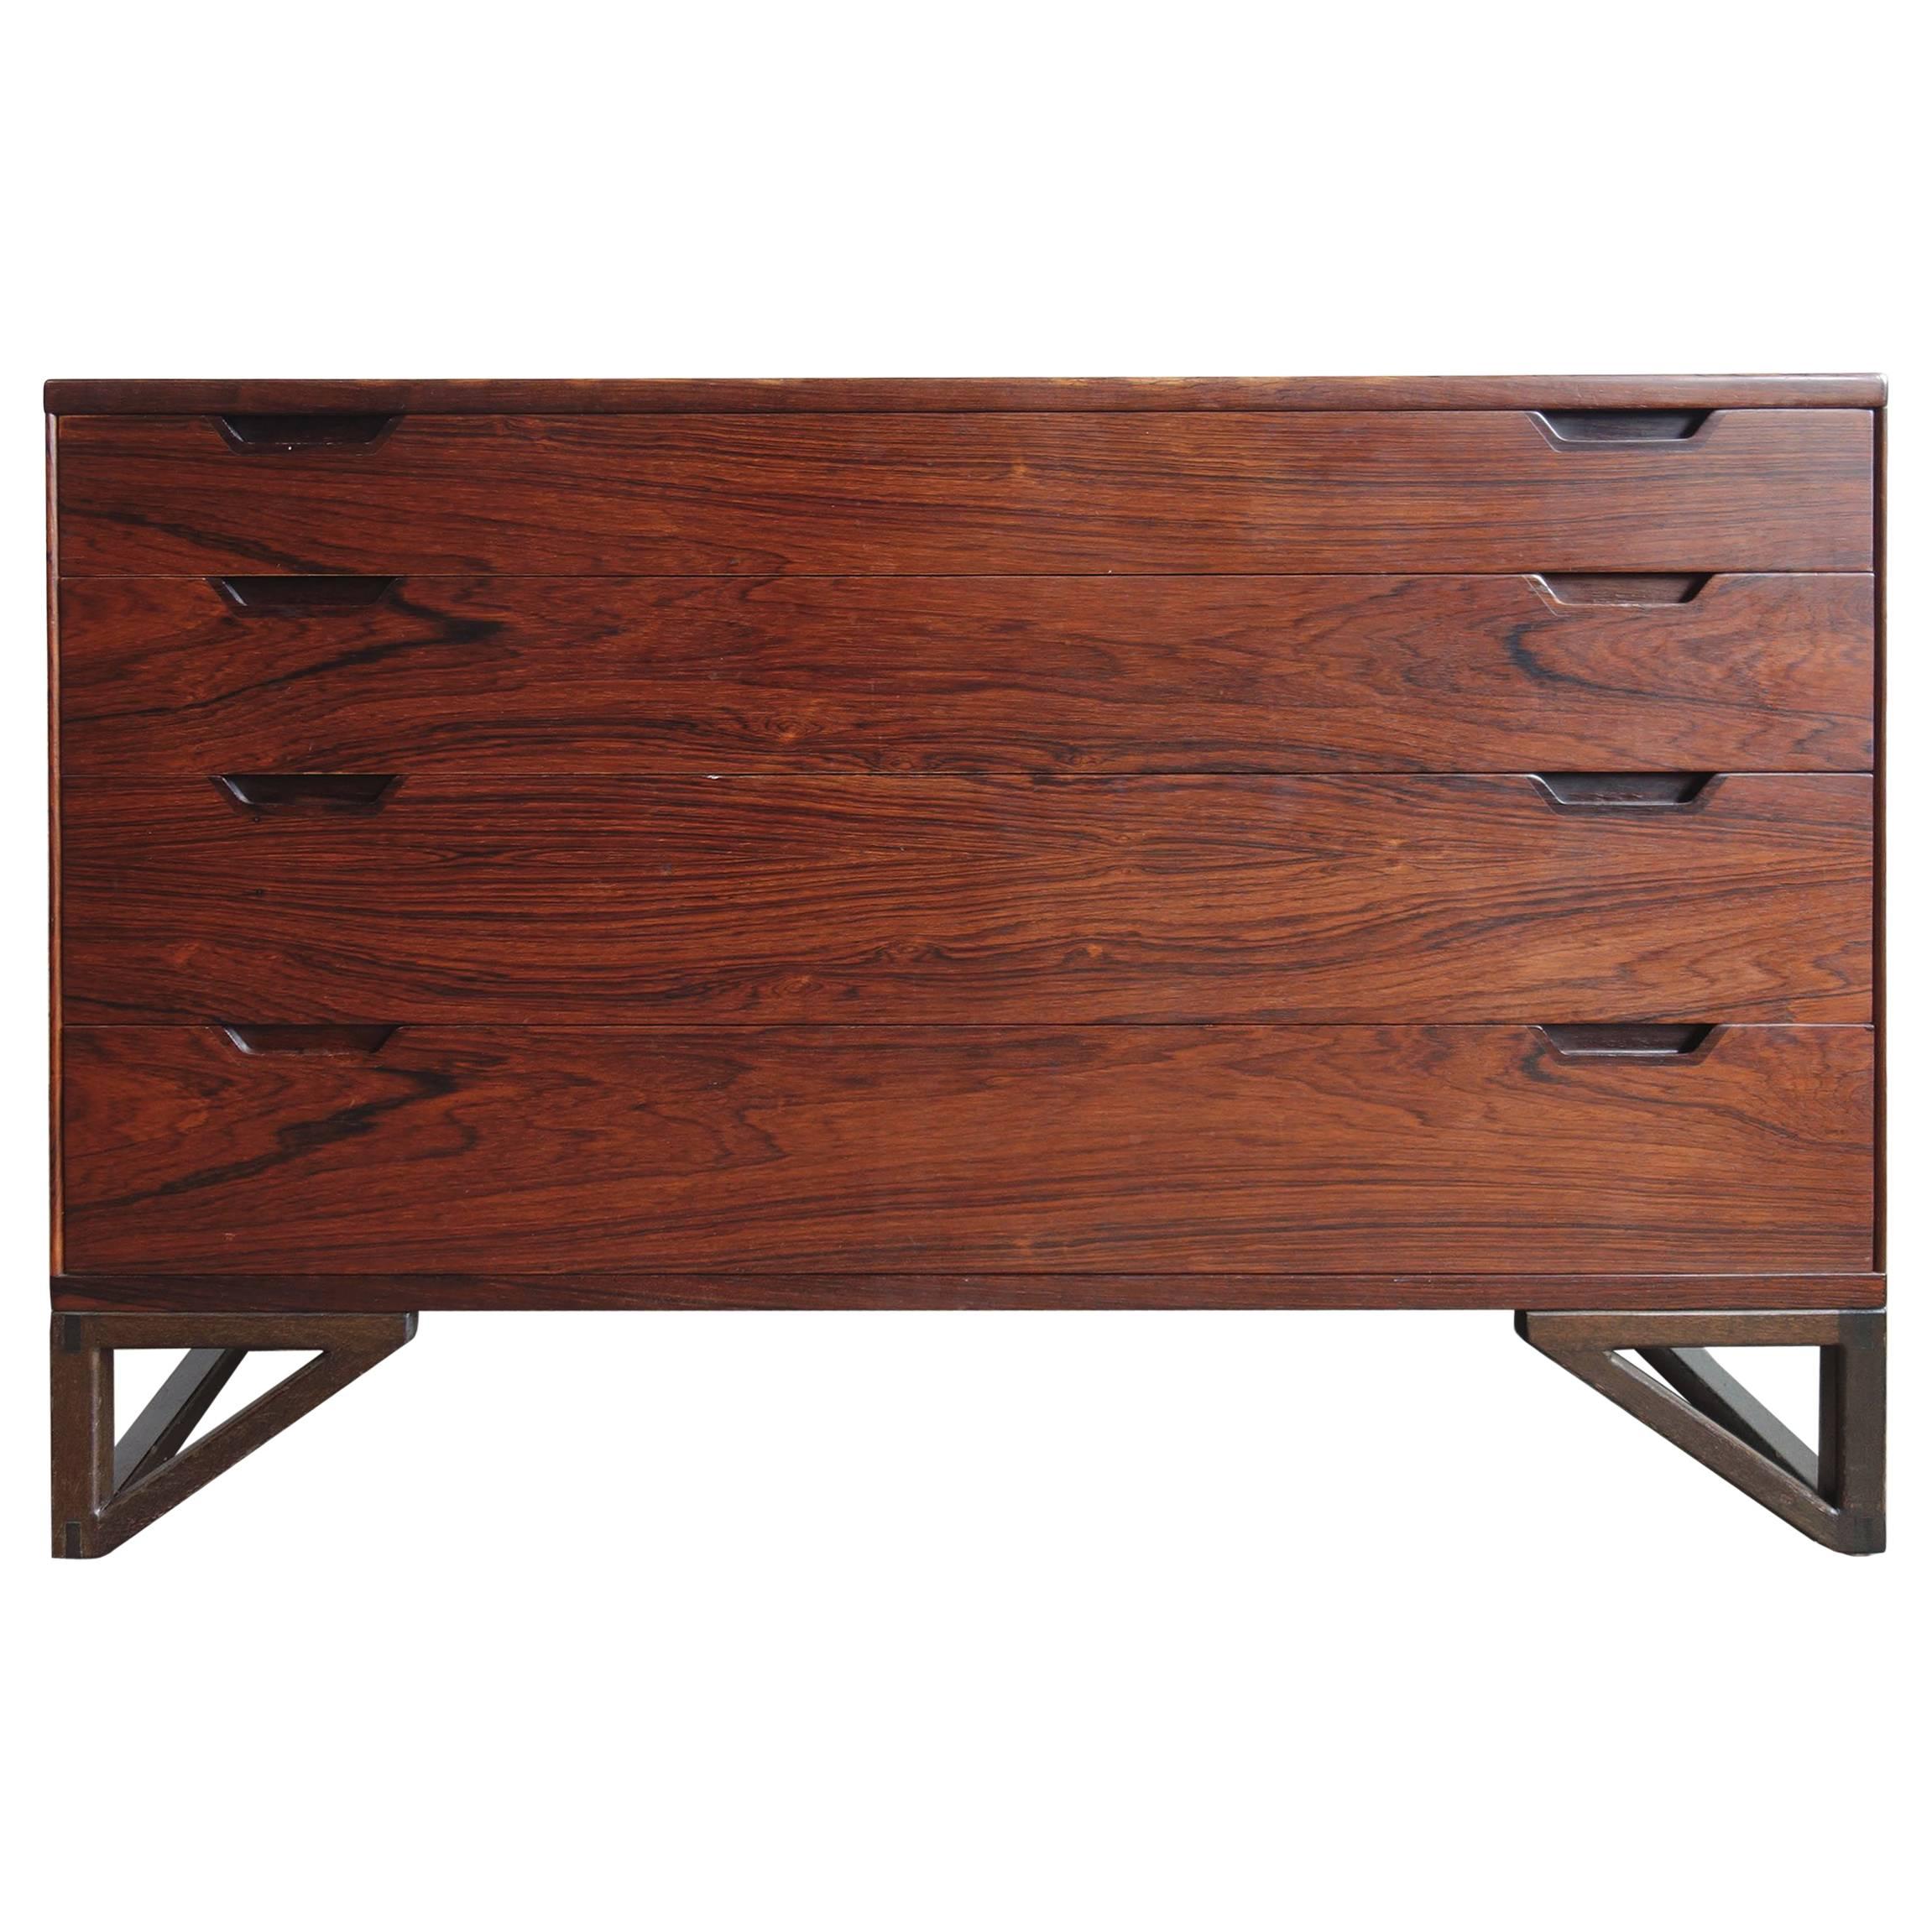 Highly desirable midcentury Svend Langkilde for Illums Bolighus rosewood chest of drawers or commode.
Rosewood is highly figured and vibrant. Very high quality. Makers mark affixed to the back.
 